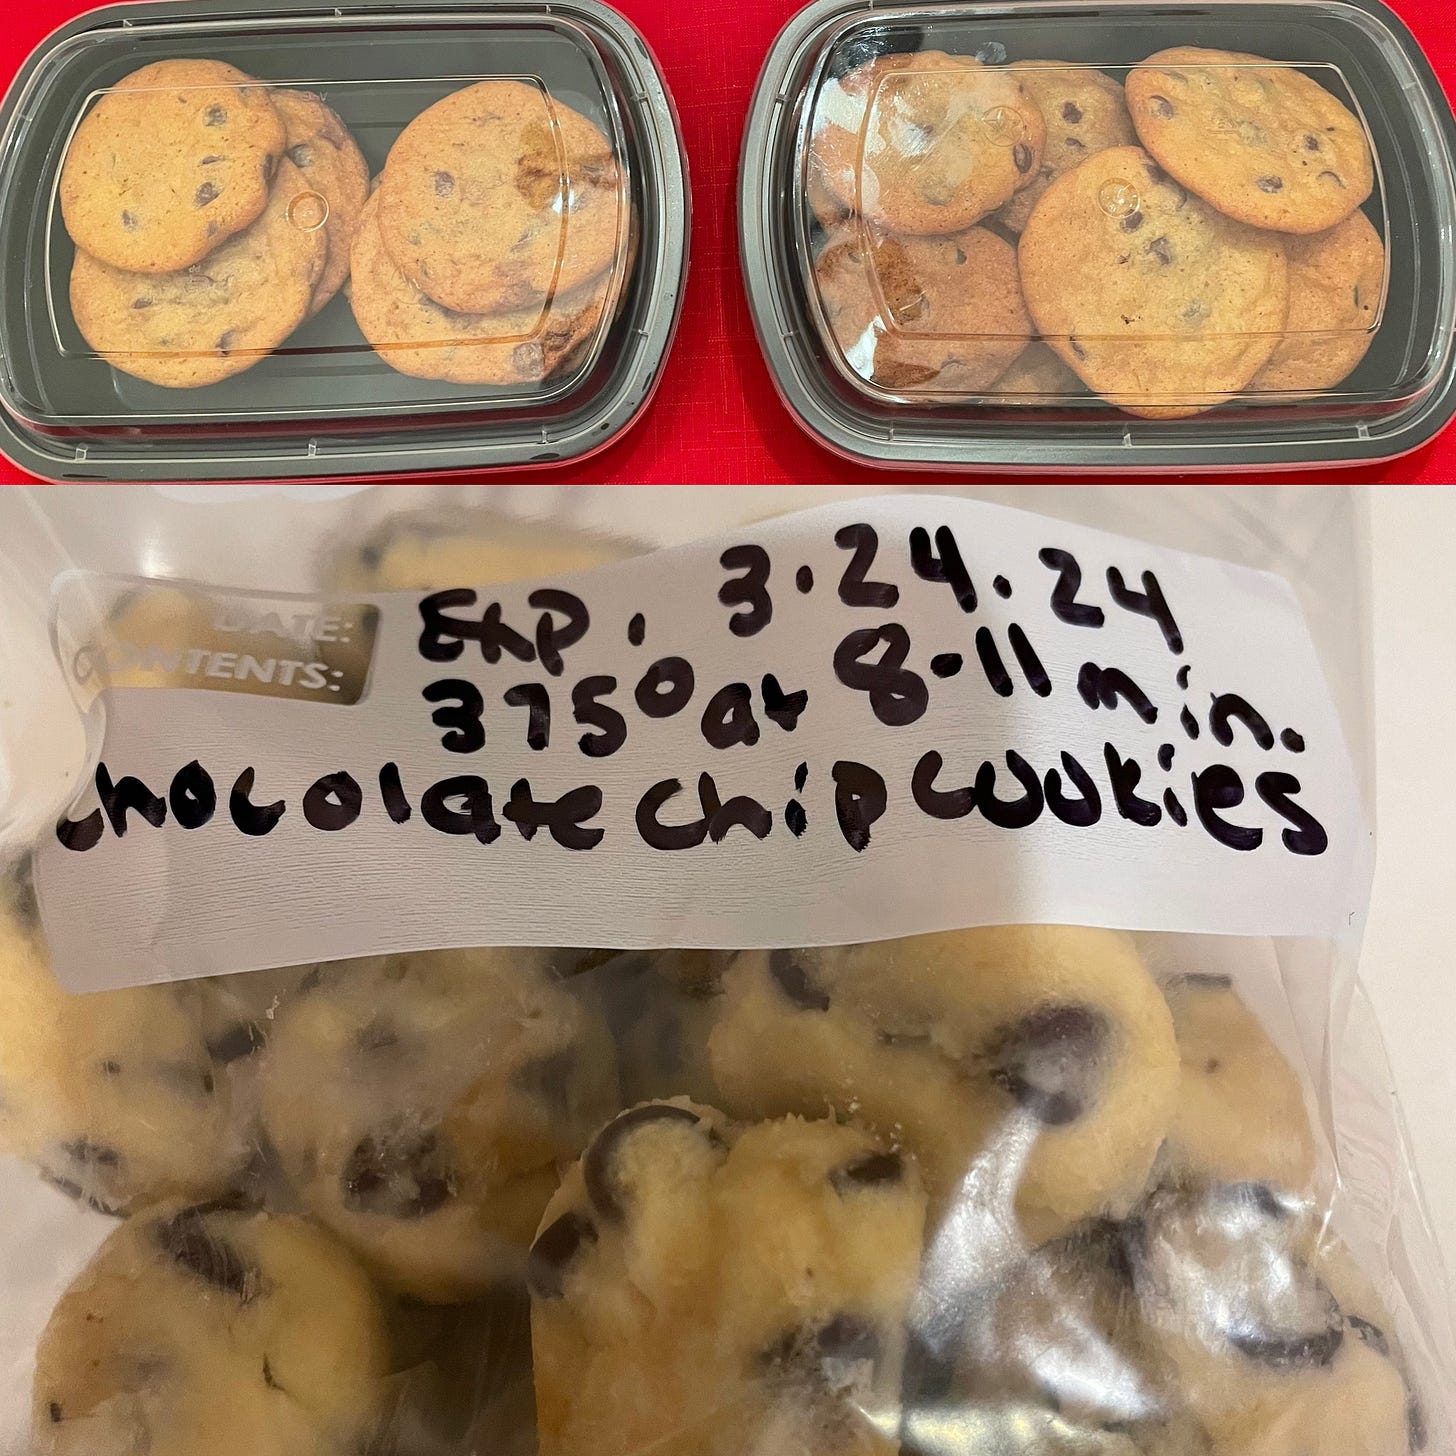 Top picture - 2 containers of chocolate chip cookies. Bottom picture - Chocolate Chip Cookie dough in freezer bag